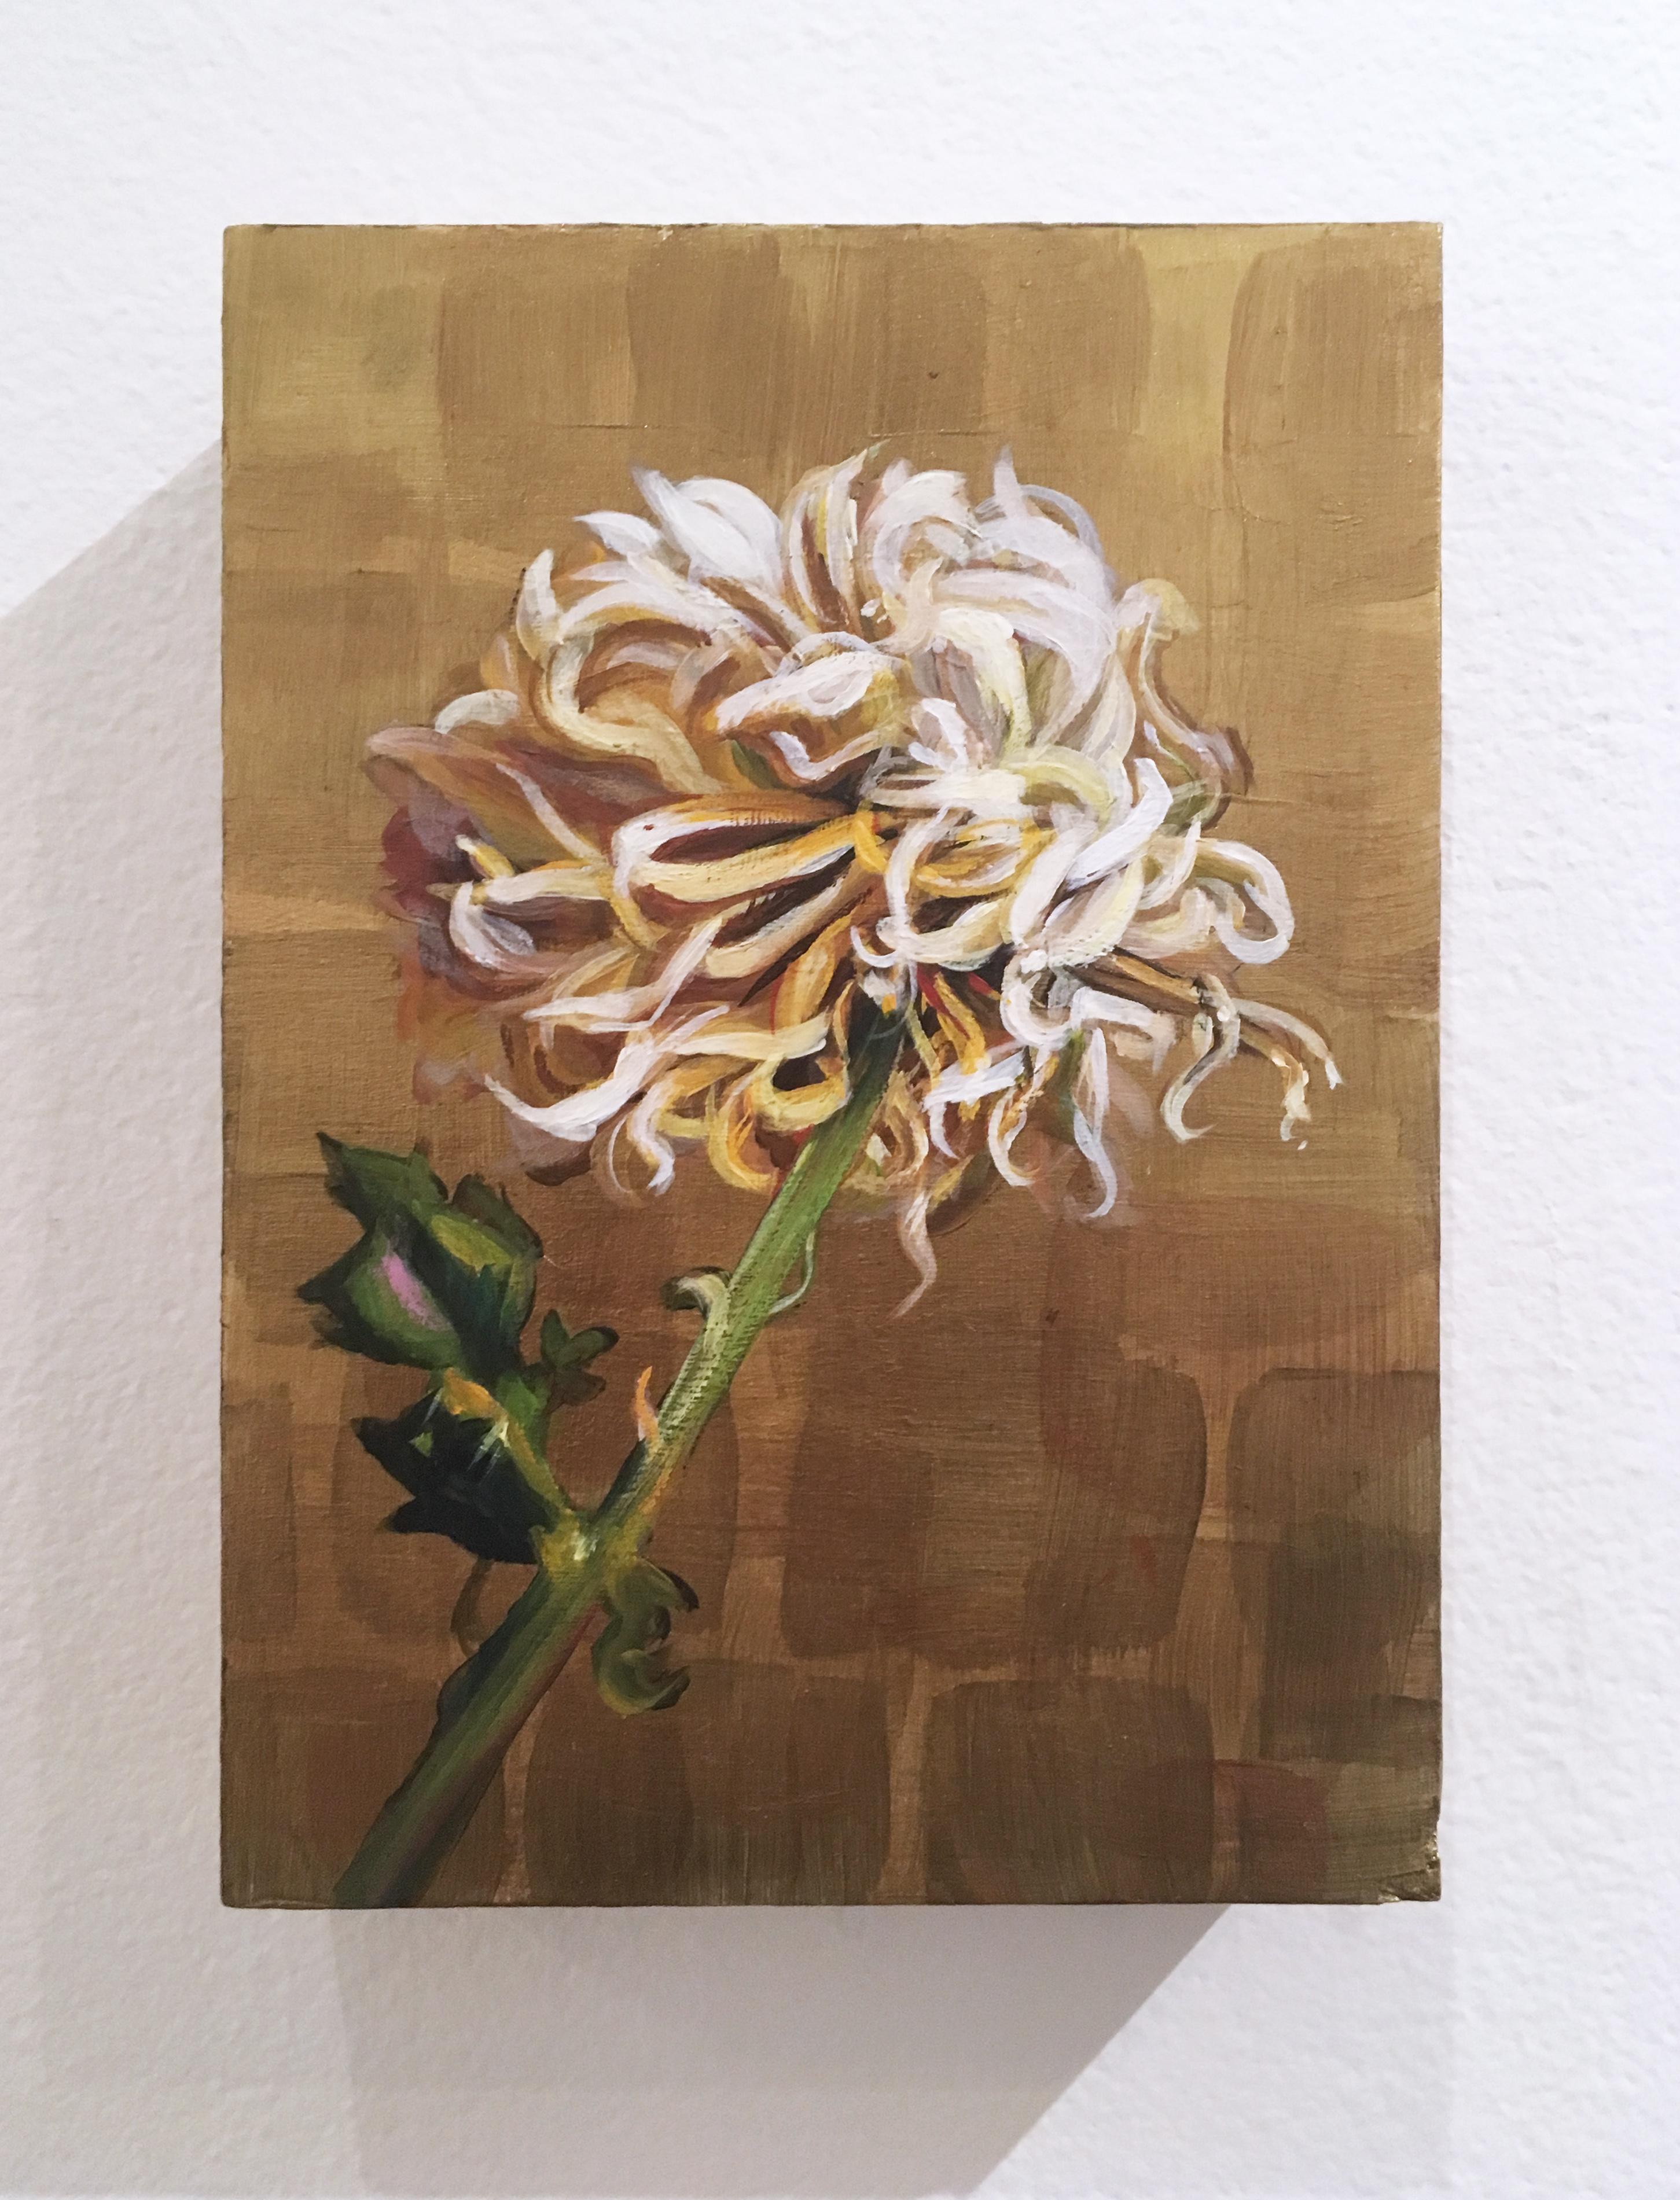 Gold and Bloom, 2019, acrylic, wood panel, floral, chrysanthemum, flower - Painting by Gigi Chen